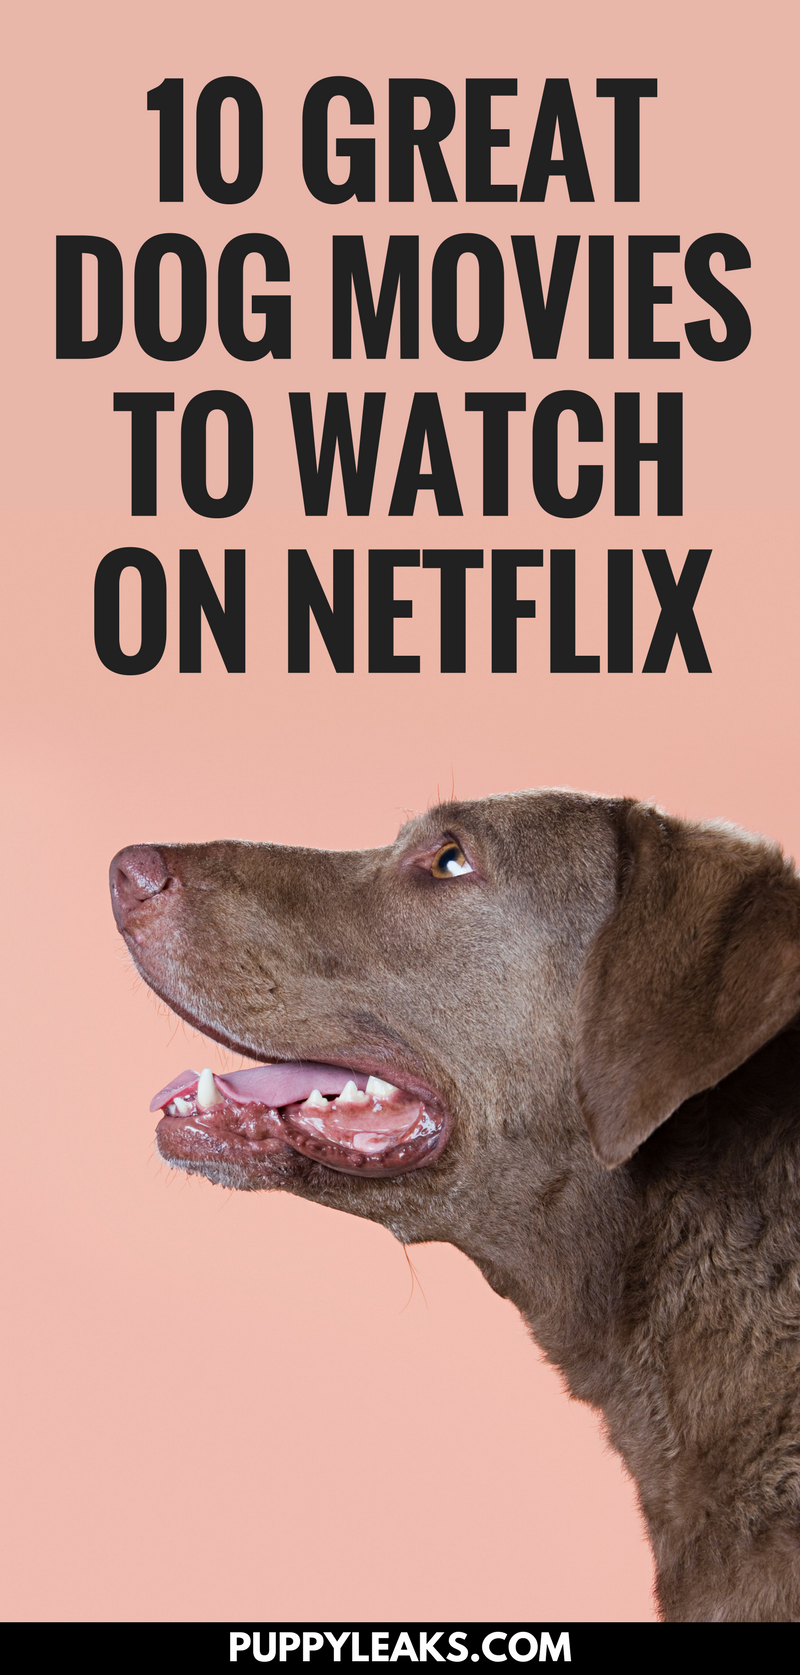 Everything is better with dogs, including movies. If you're looking for some great family oriented dog movies to watch Netflix has some great options. From Homeward Bound to Benji, here's 10 great dog movies available on Netflix. #dogs #puppies #movies #dogstuff 